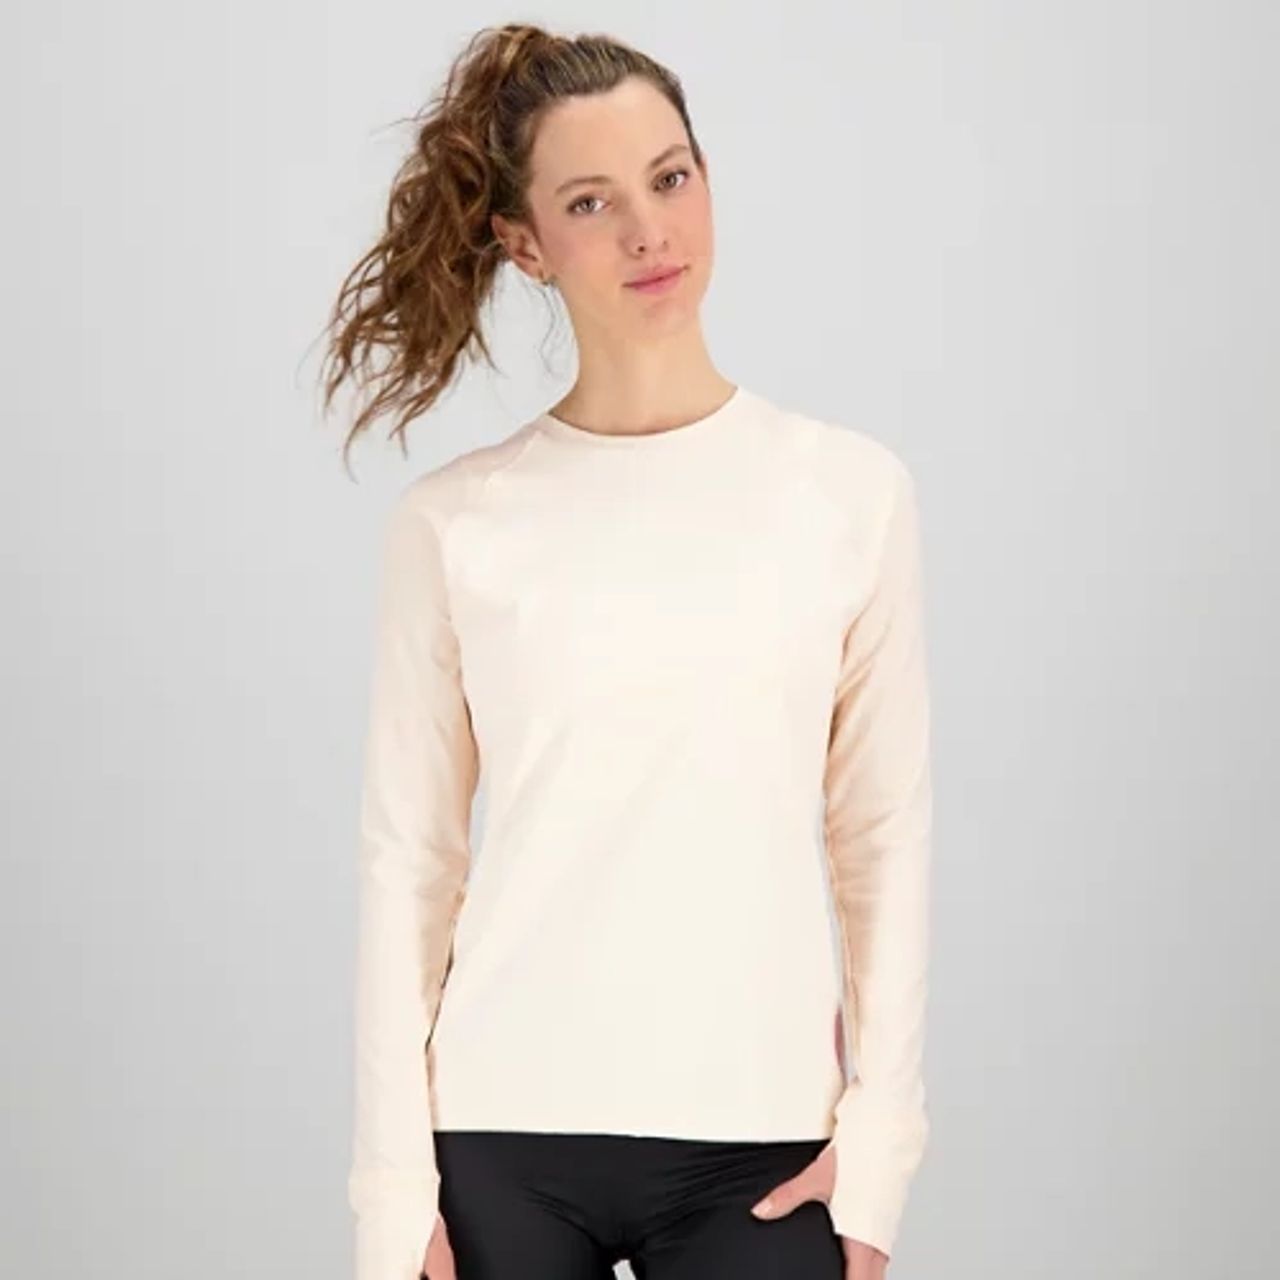 The Shape Shield Long Sleeve is an innovative performance essential. Featuring Shape Shield and moisture-wicking NB DRY technology, this women’s athletic top delivers premium stretch and coverage while remaining super soft and lightweight. Designed for your comfort and convenience, the longer raglan sleeves are crafted from a breathable power mesh with thumbholes and a small key storage pocket at the cuff.